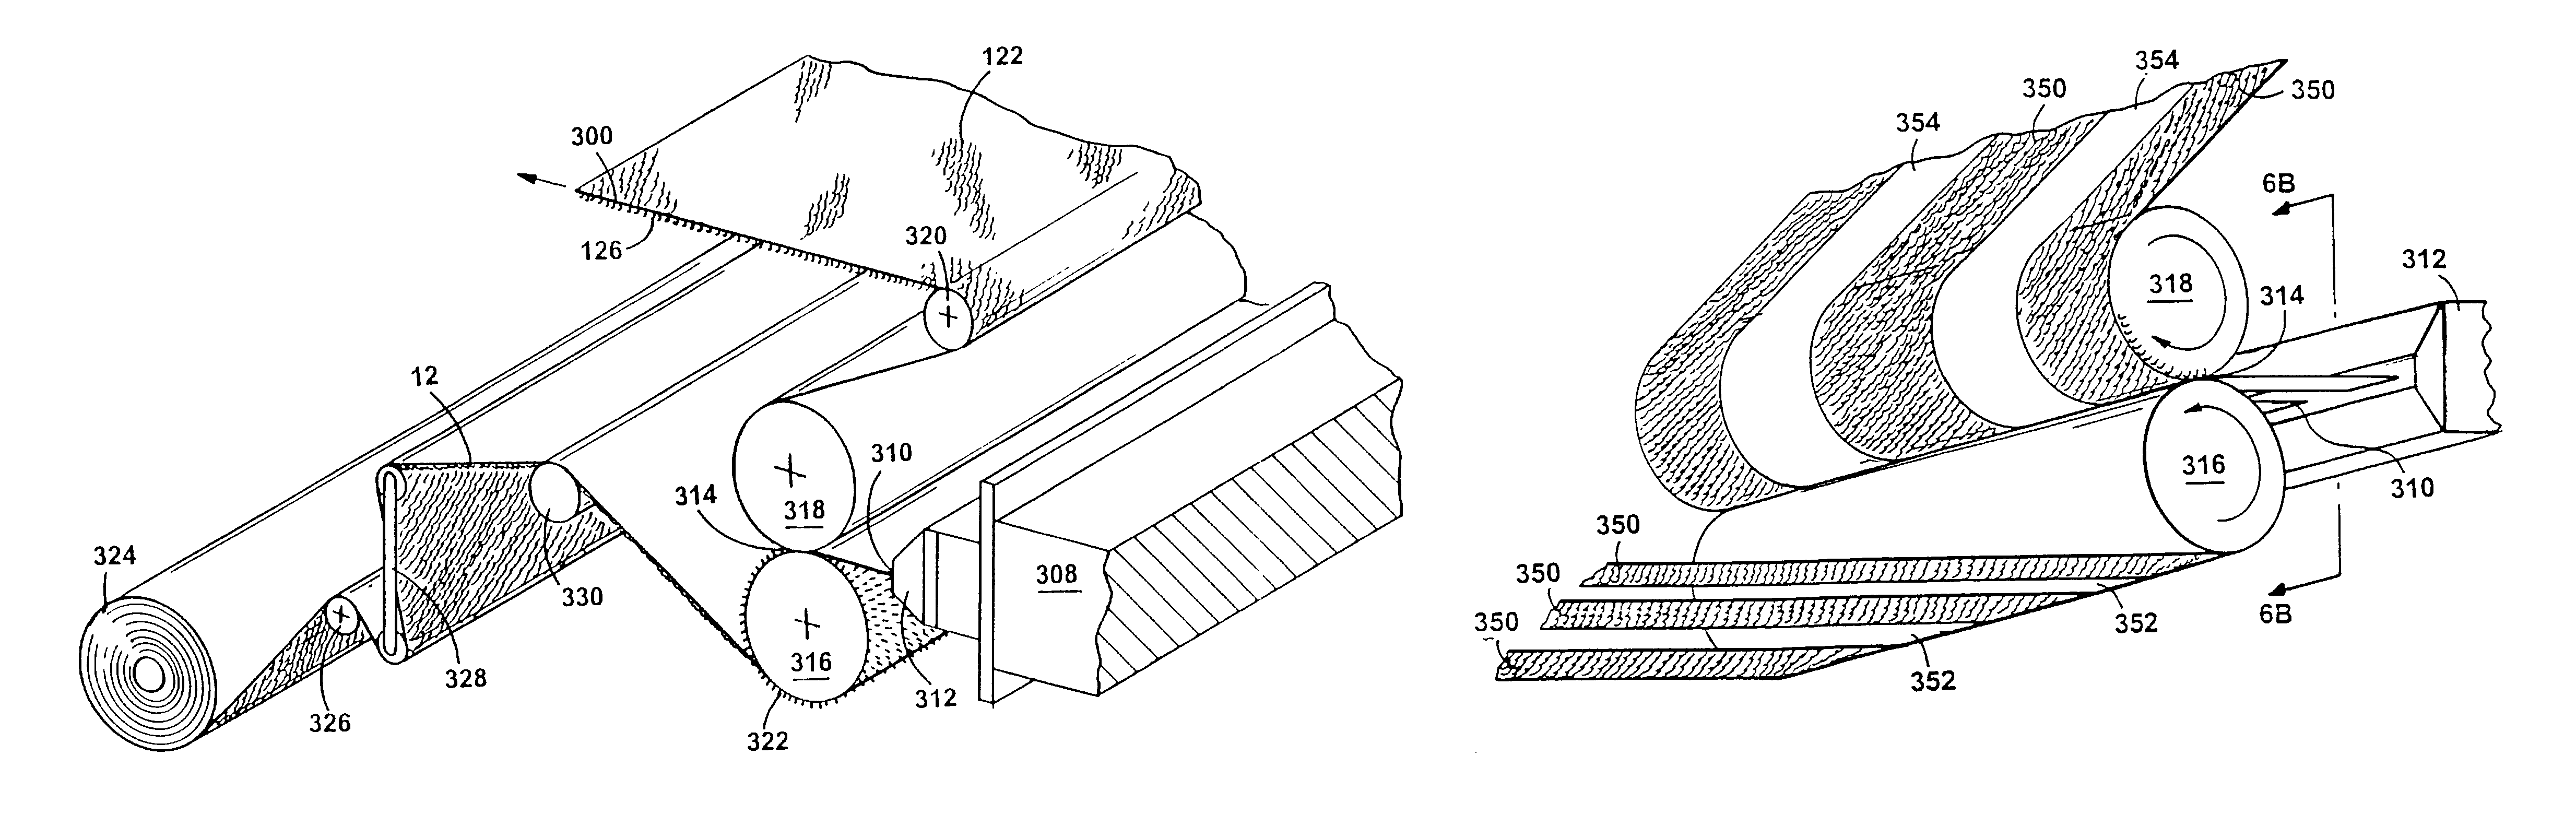 Composite hook and loop fasteners, methods of their manufacture, and products containing them